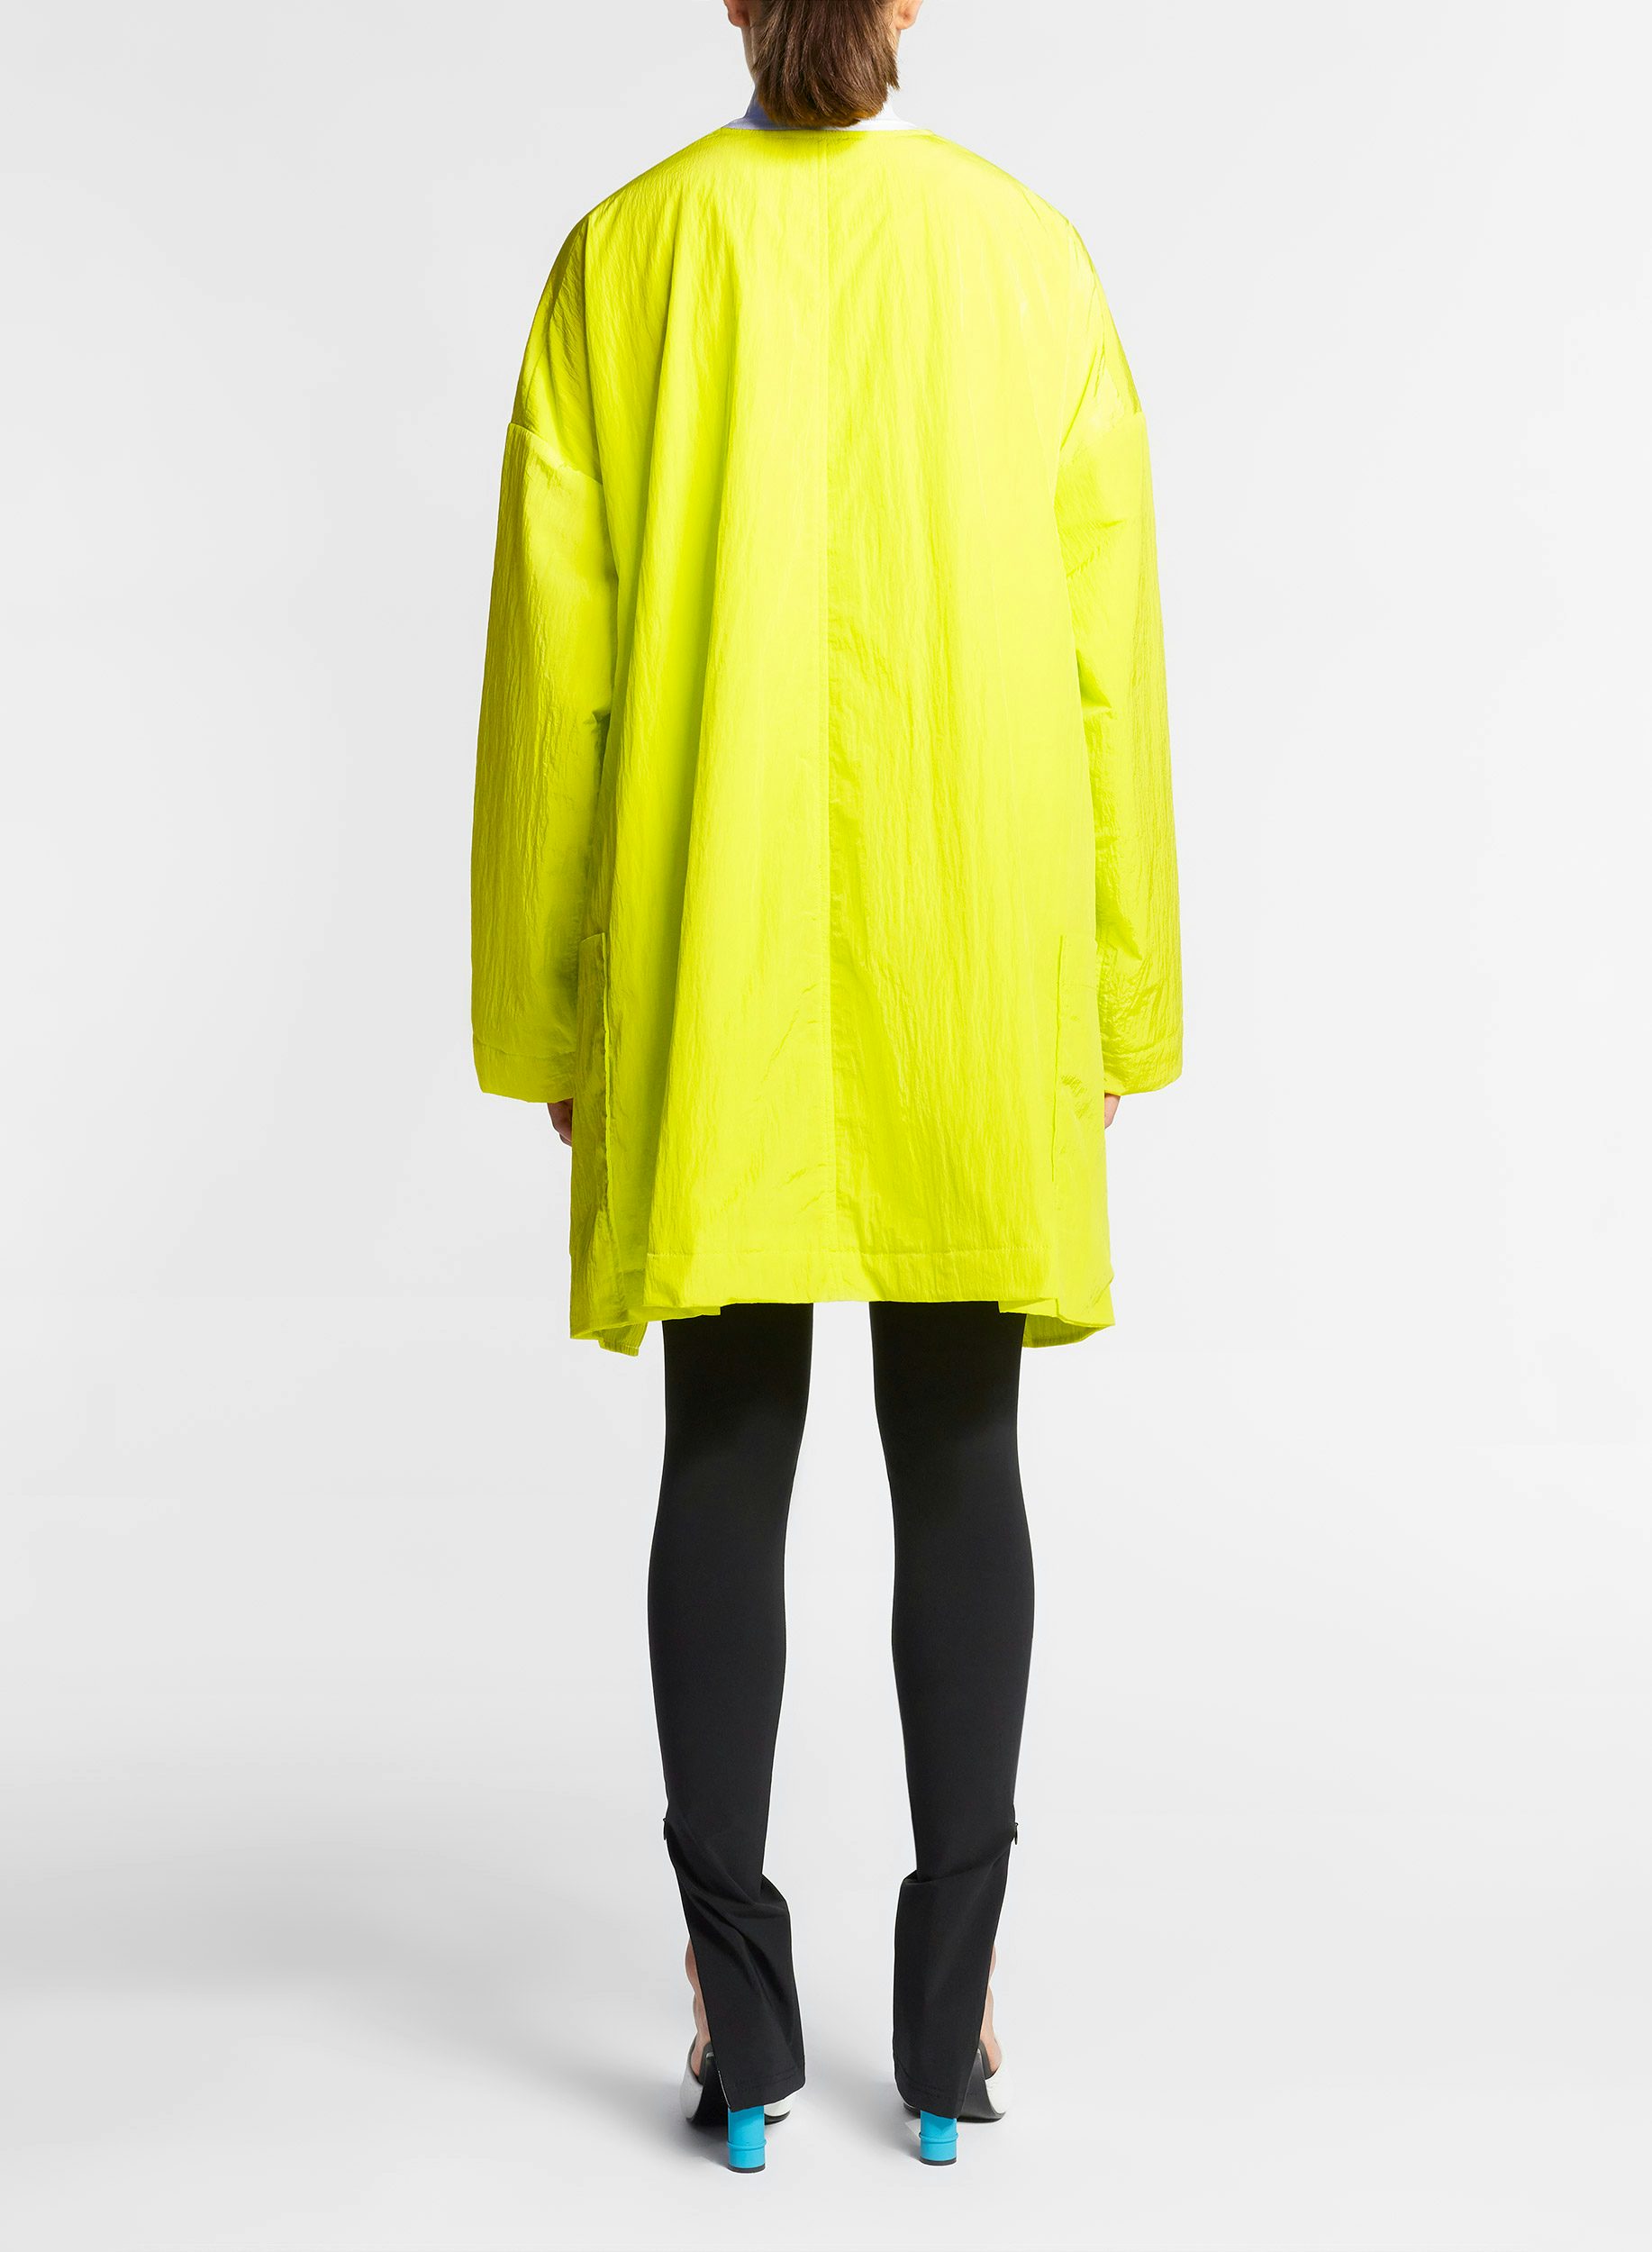 Lime short trench coat in technical fabric - Nina Ricci